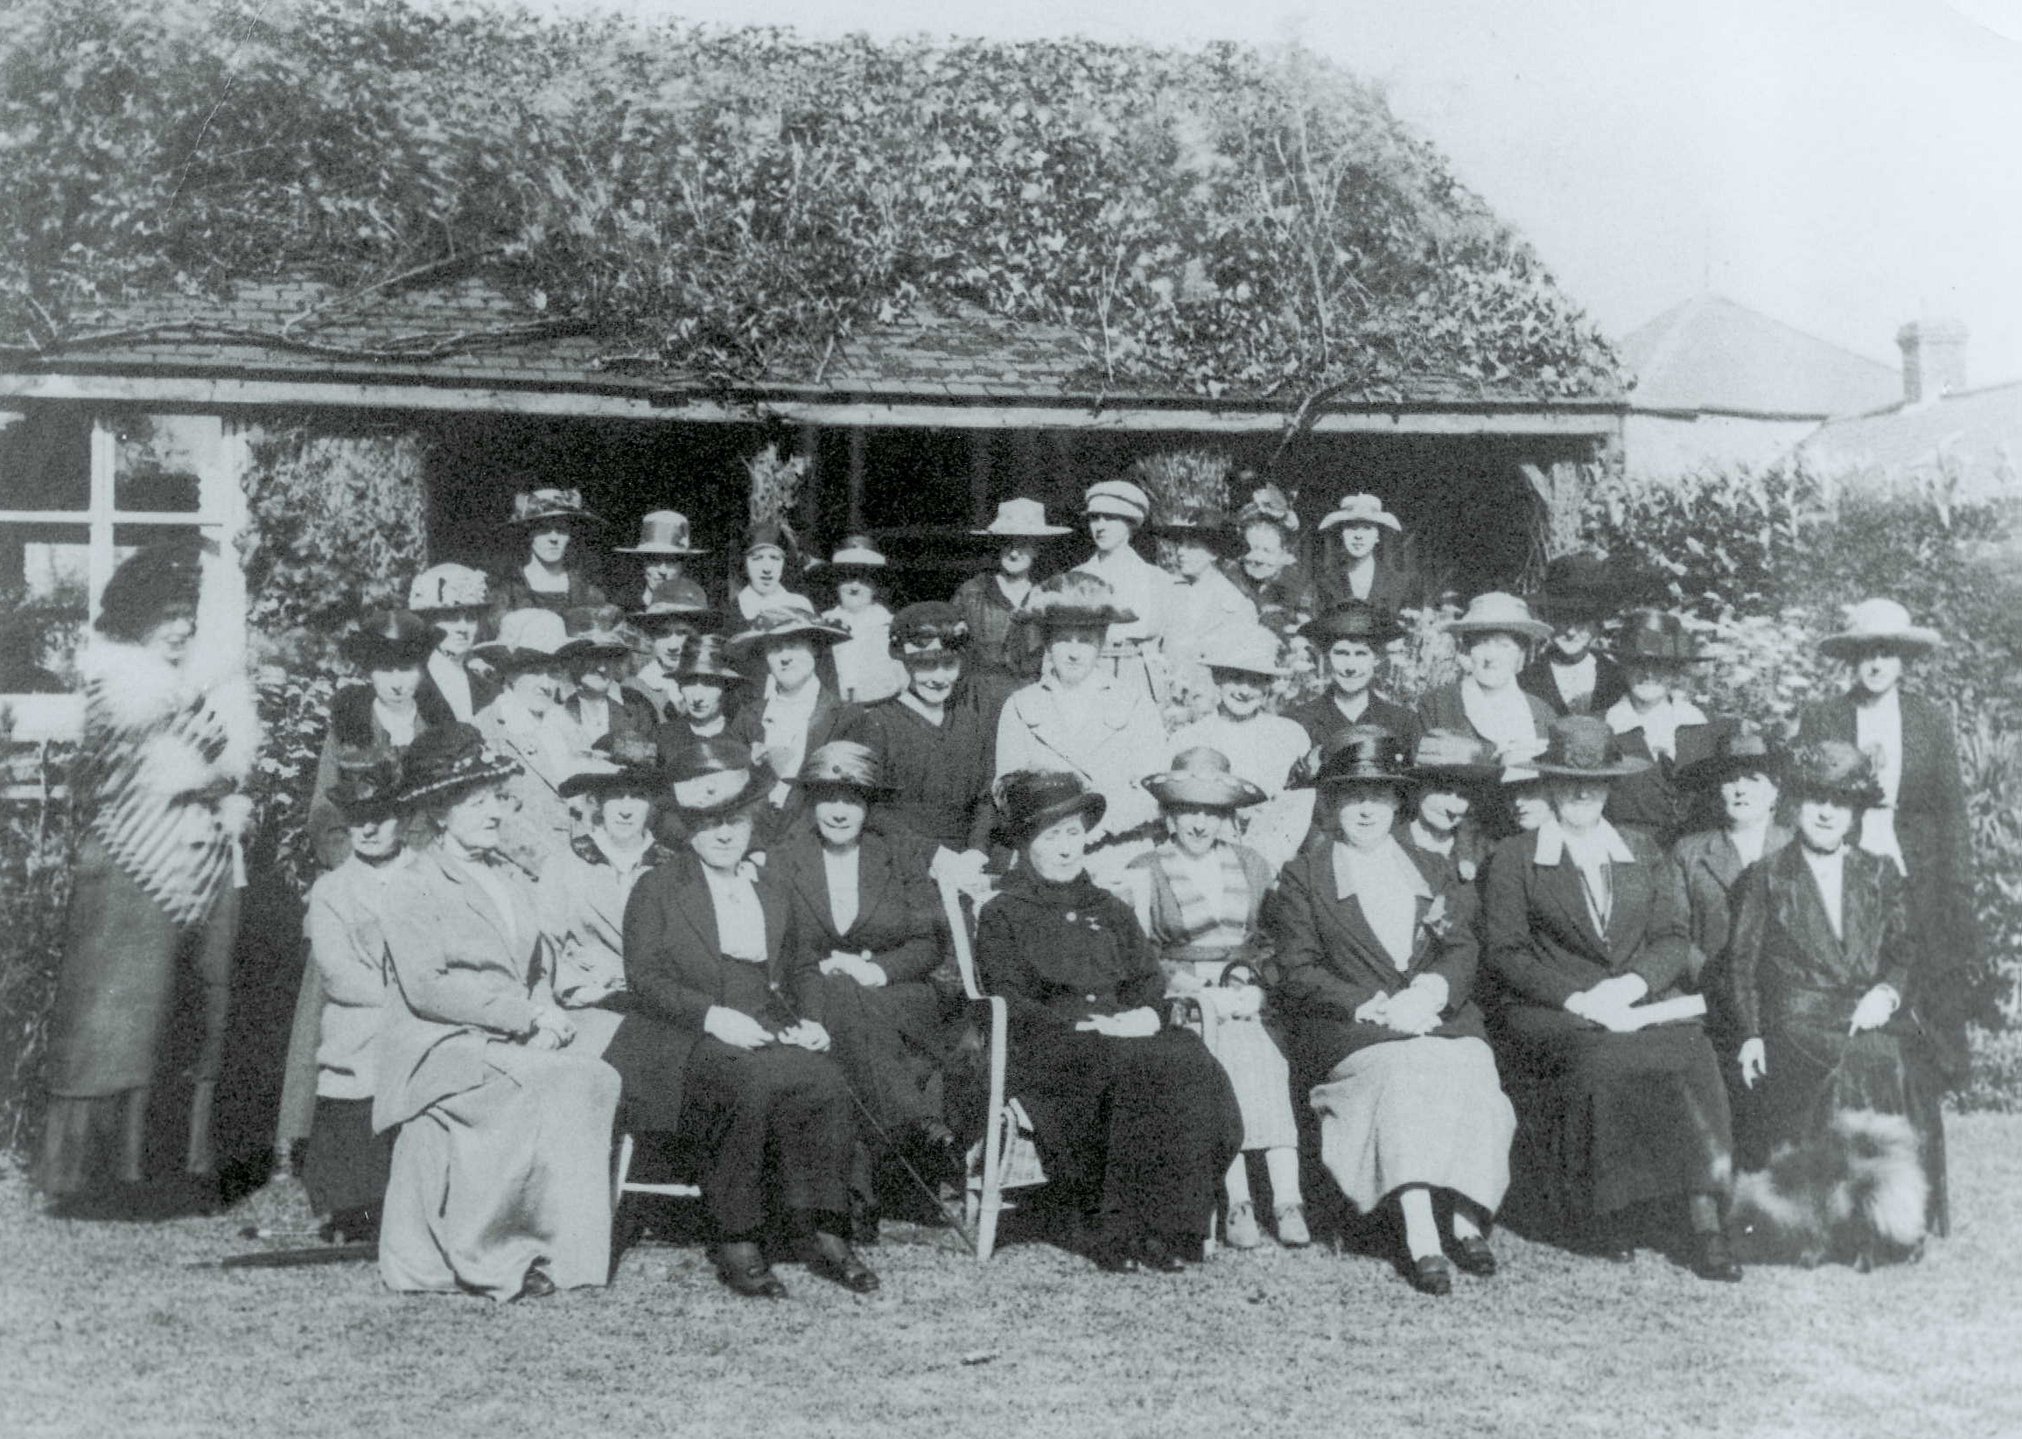 Old photo of a large group of women in hats seated/standing in a posed group in front of a low building with an overgrown tiled roof.